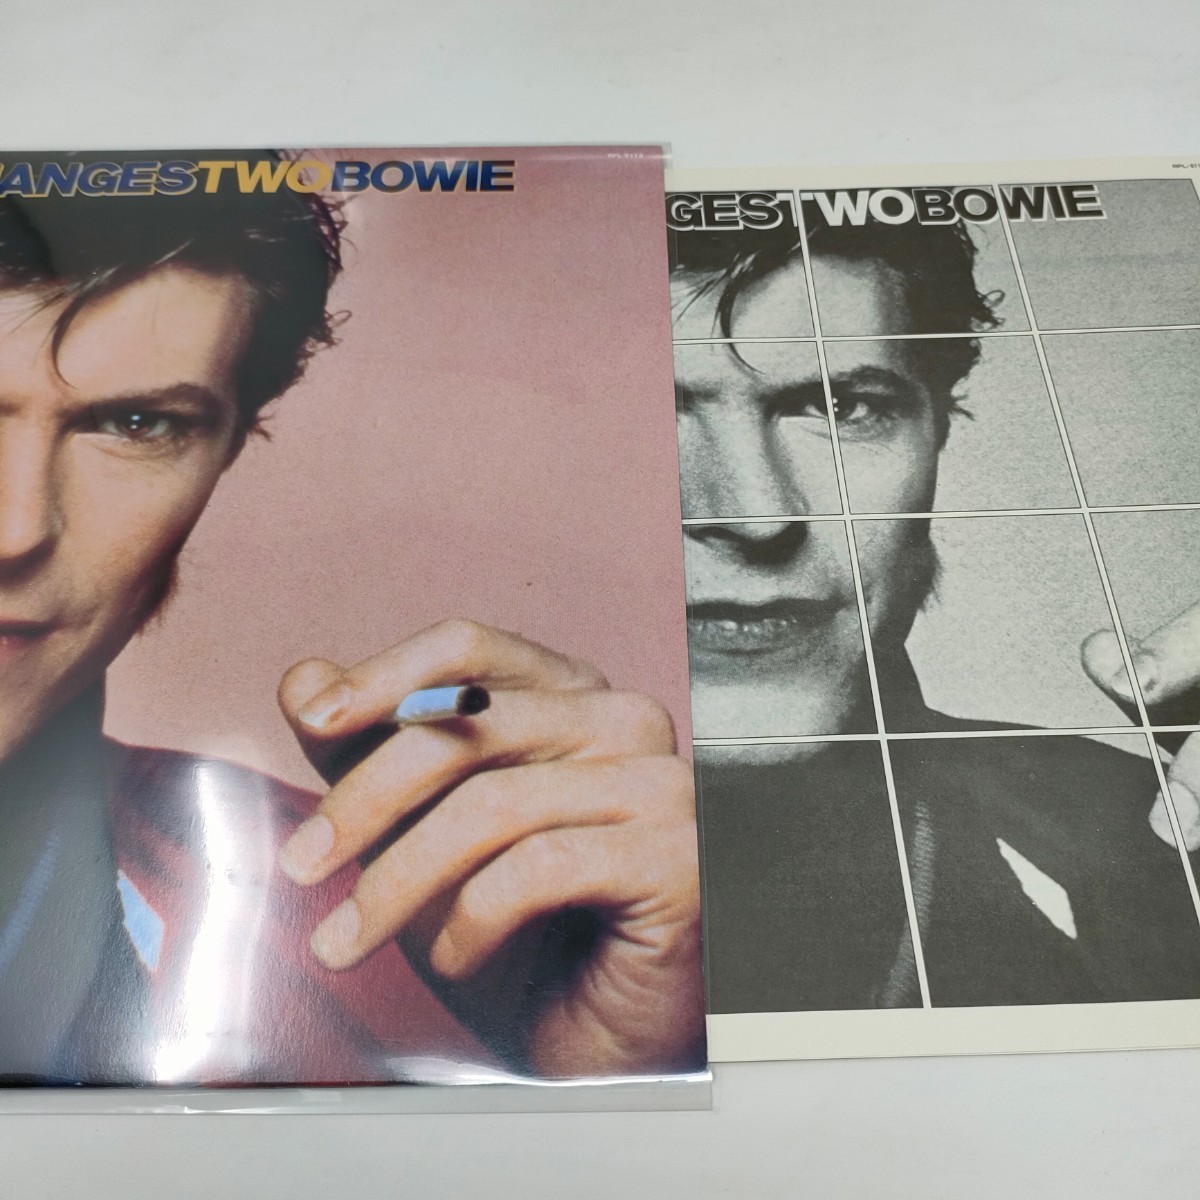 LP 2枚　デヴィッド・ボウイ　DAVID BOWIE　Special （SLA9503-04 ）/ changes two bowie 美しき魂の告白 （RPL8113 ）即決　送料込み